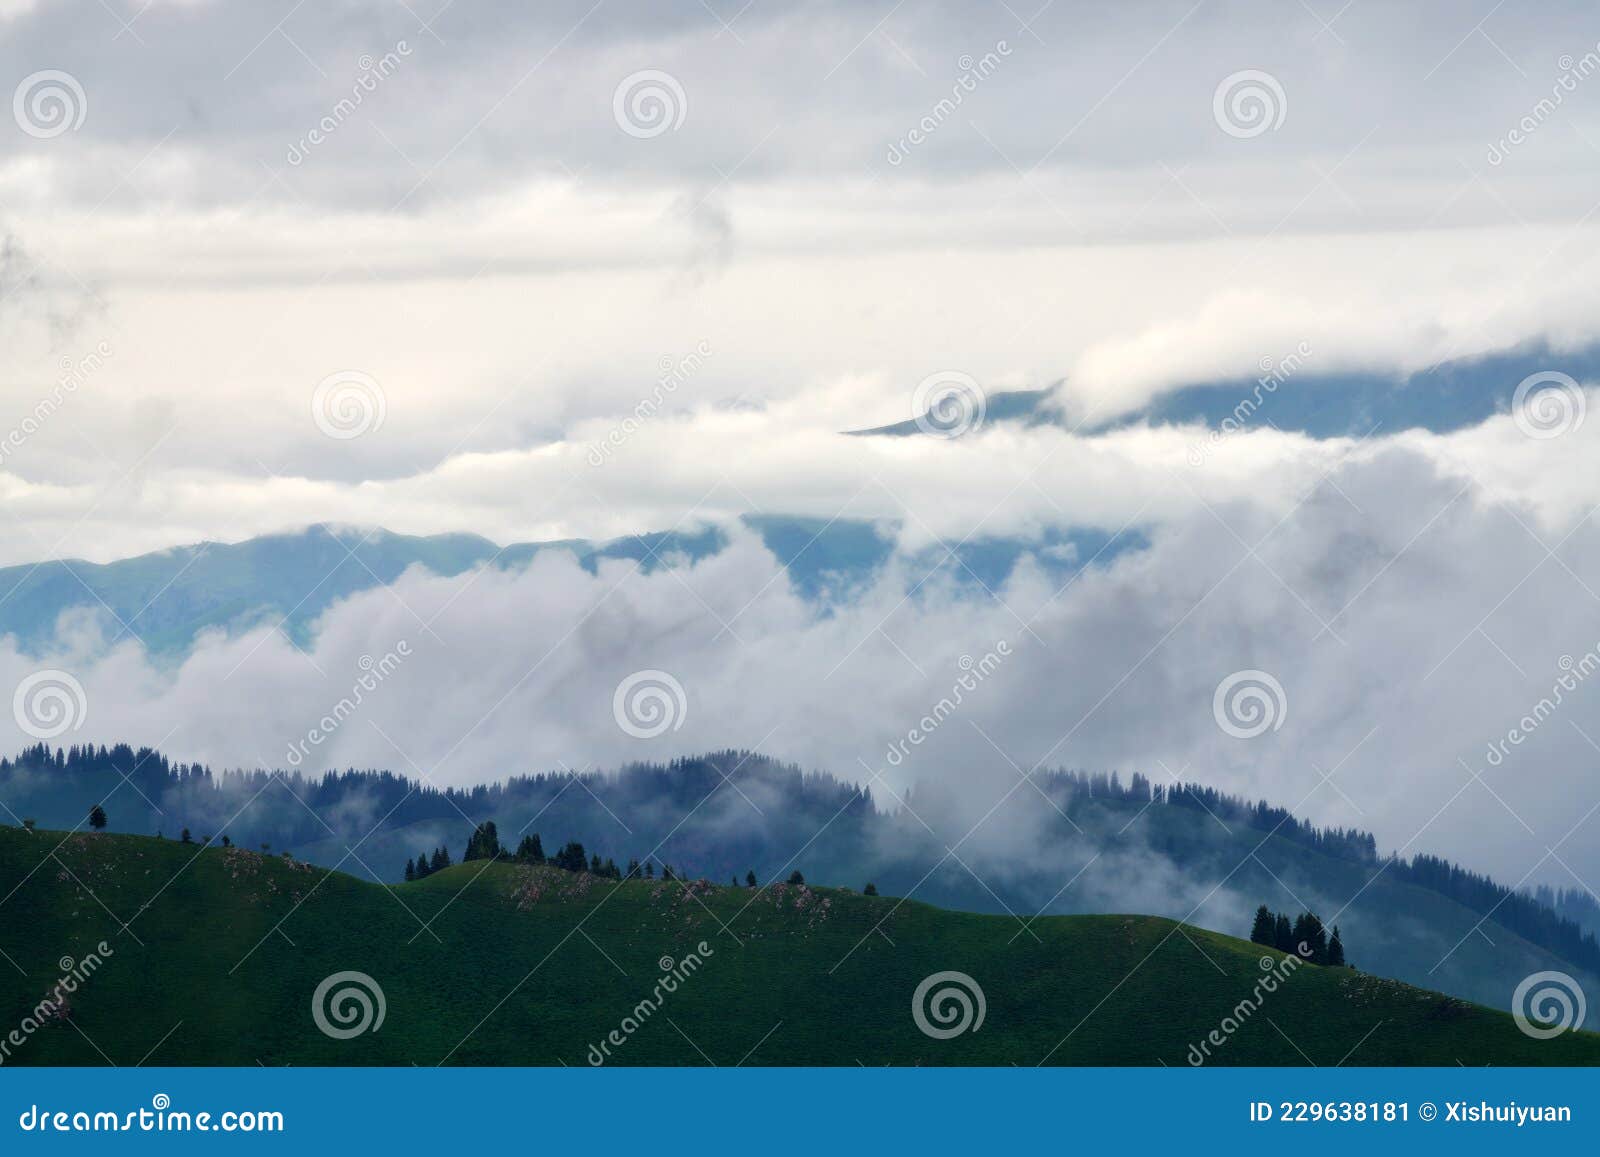 the mountains cloudily in valley grassland